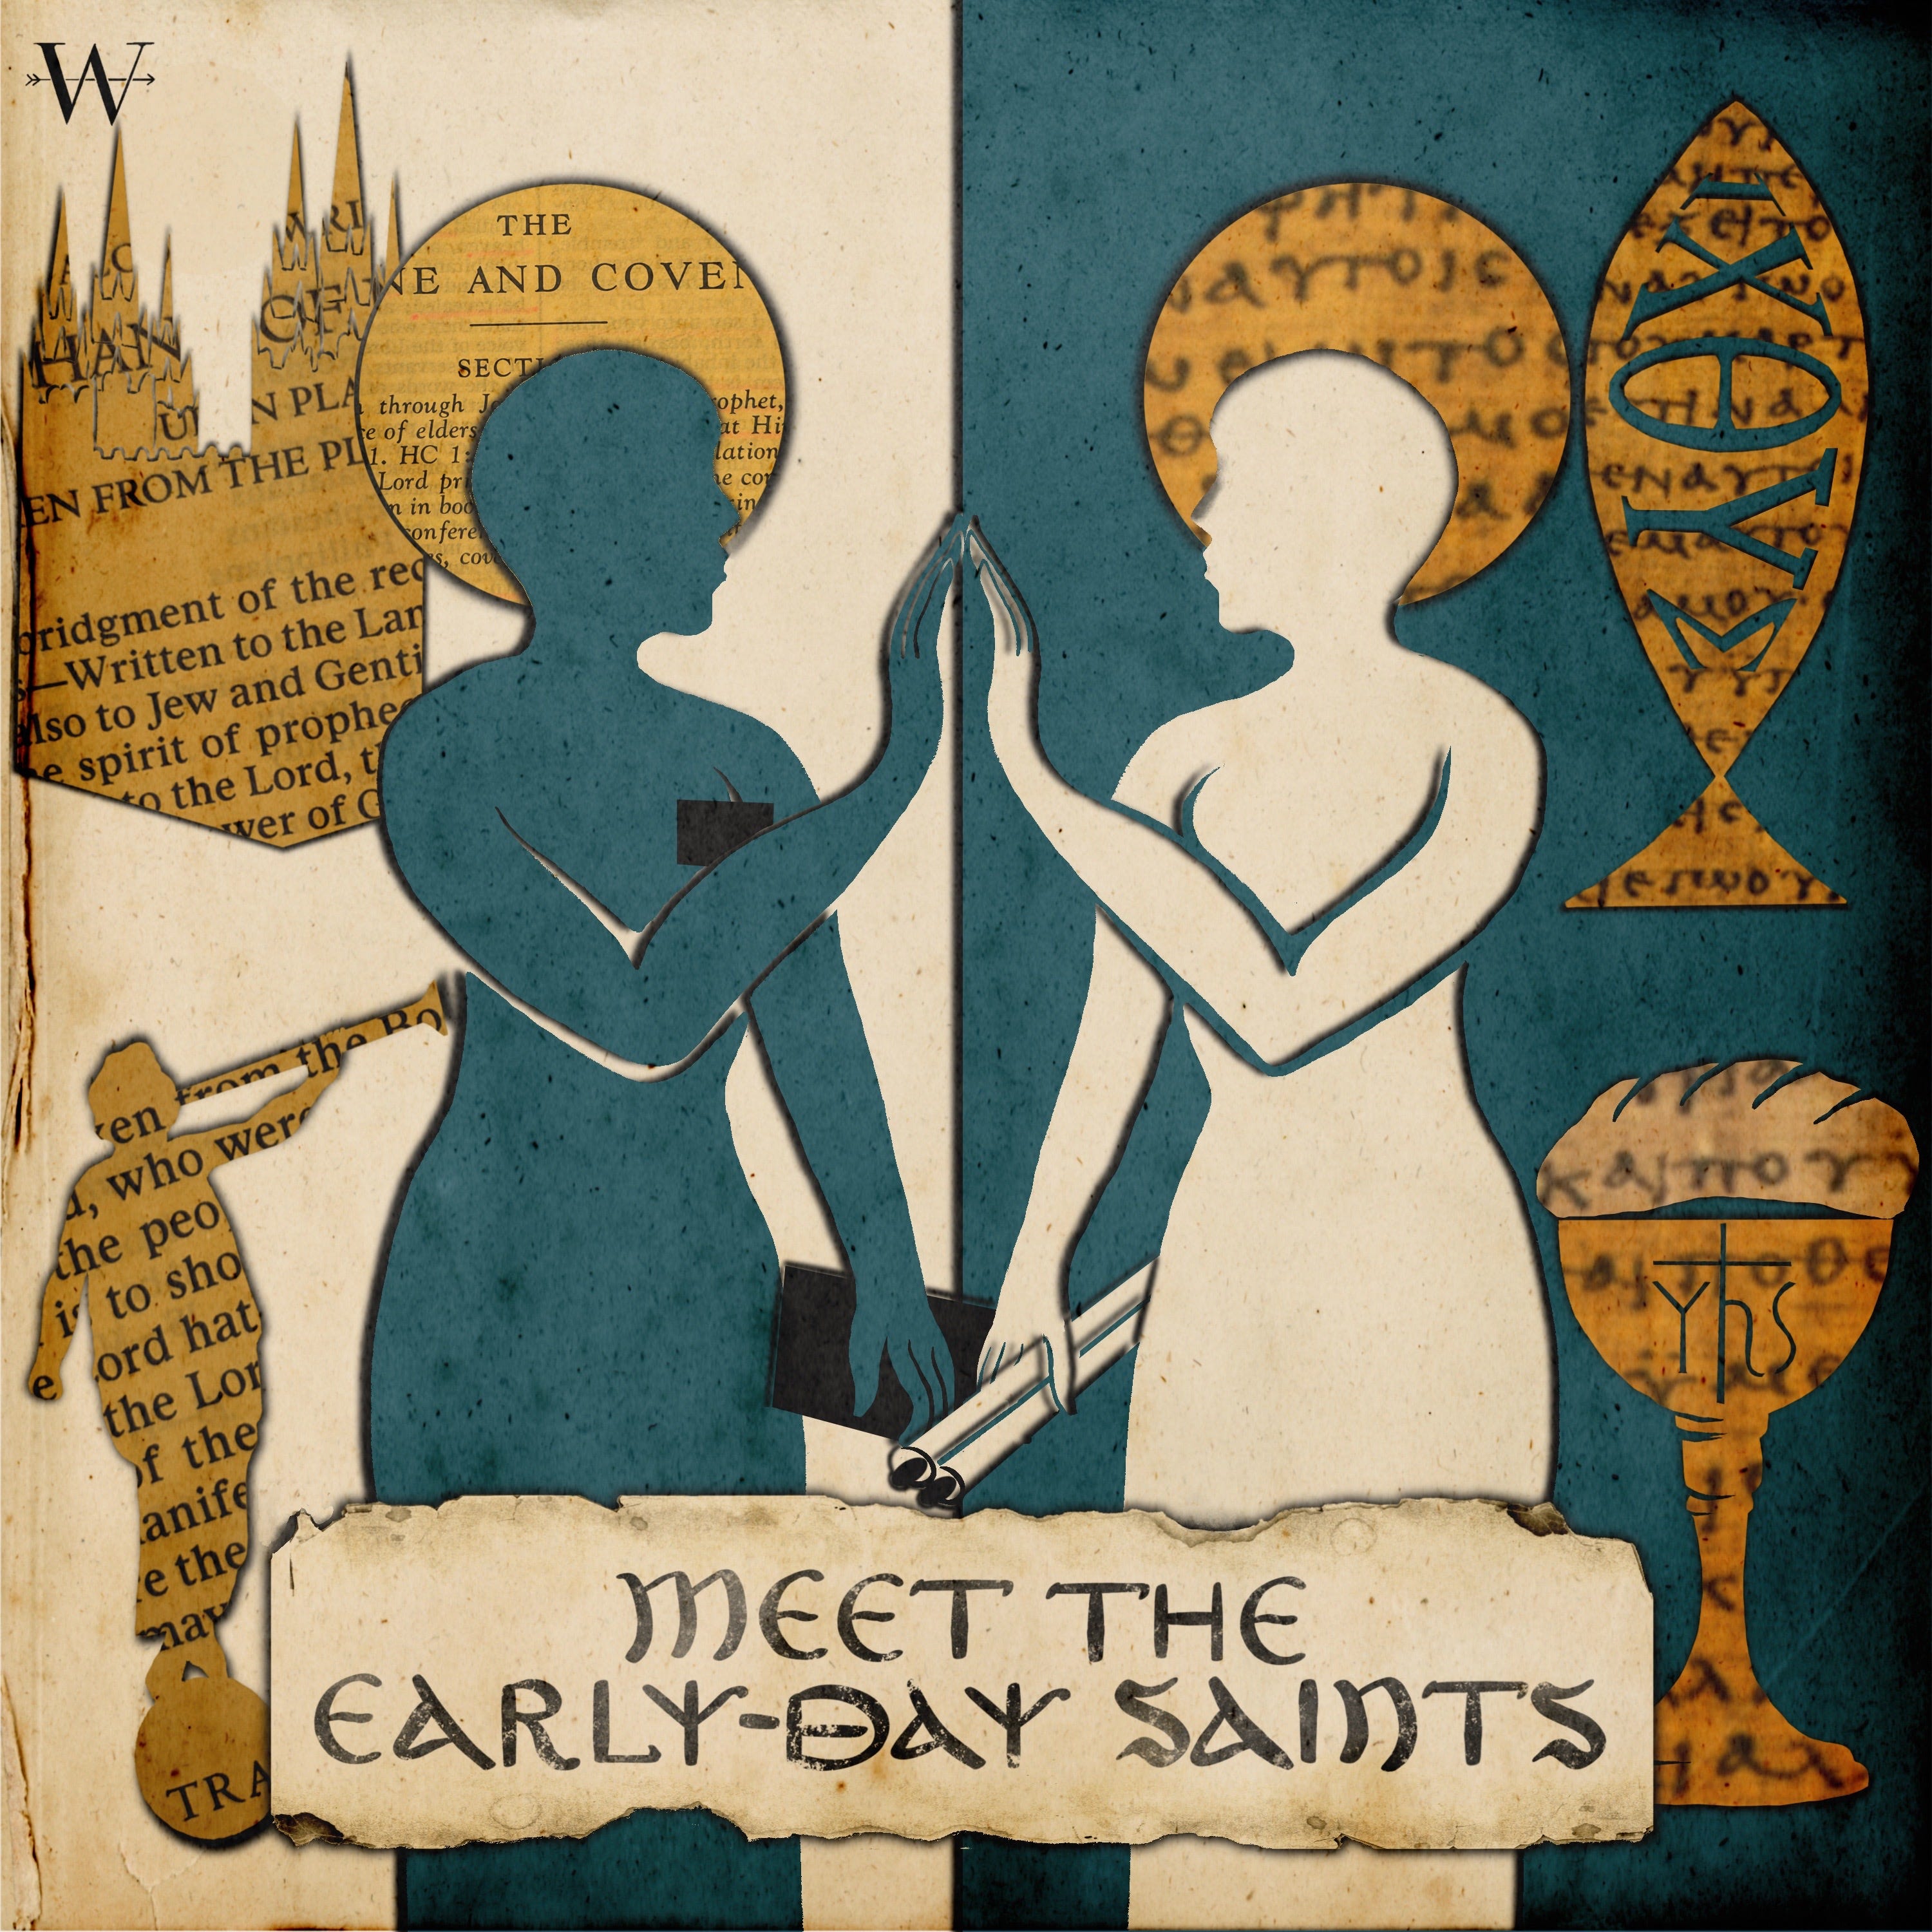 Meet the Early-day Saints Episode 14: Middle-day Saints, with Miranda Wilcox